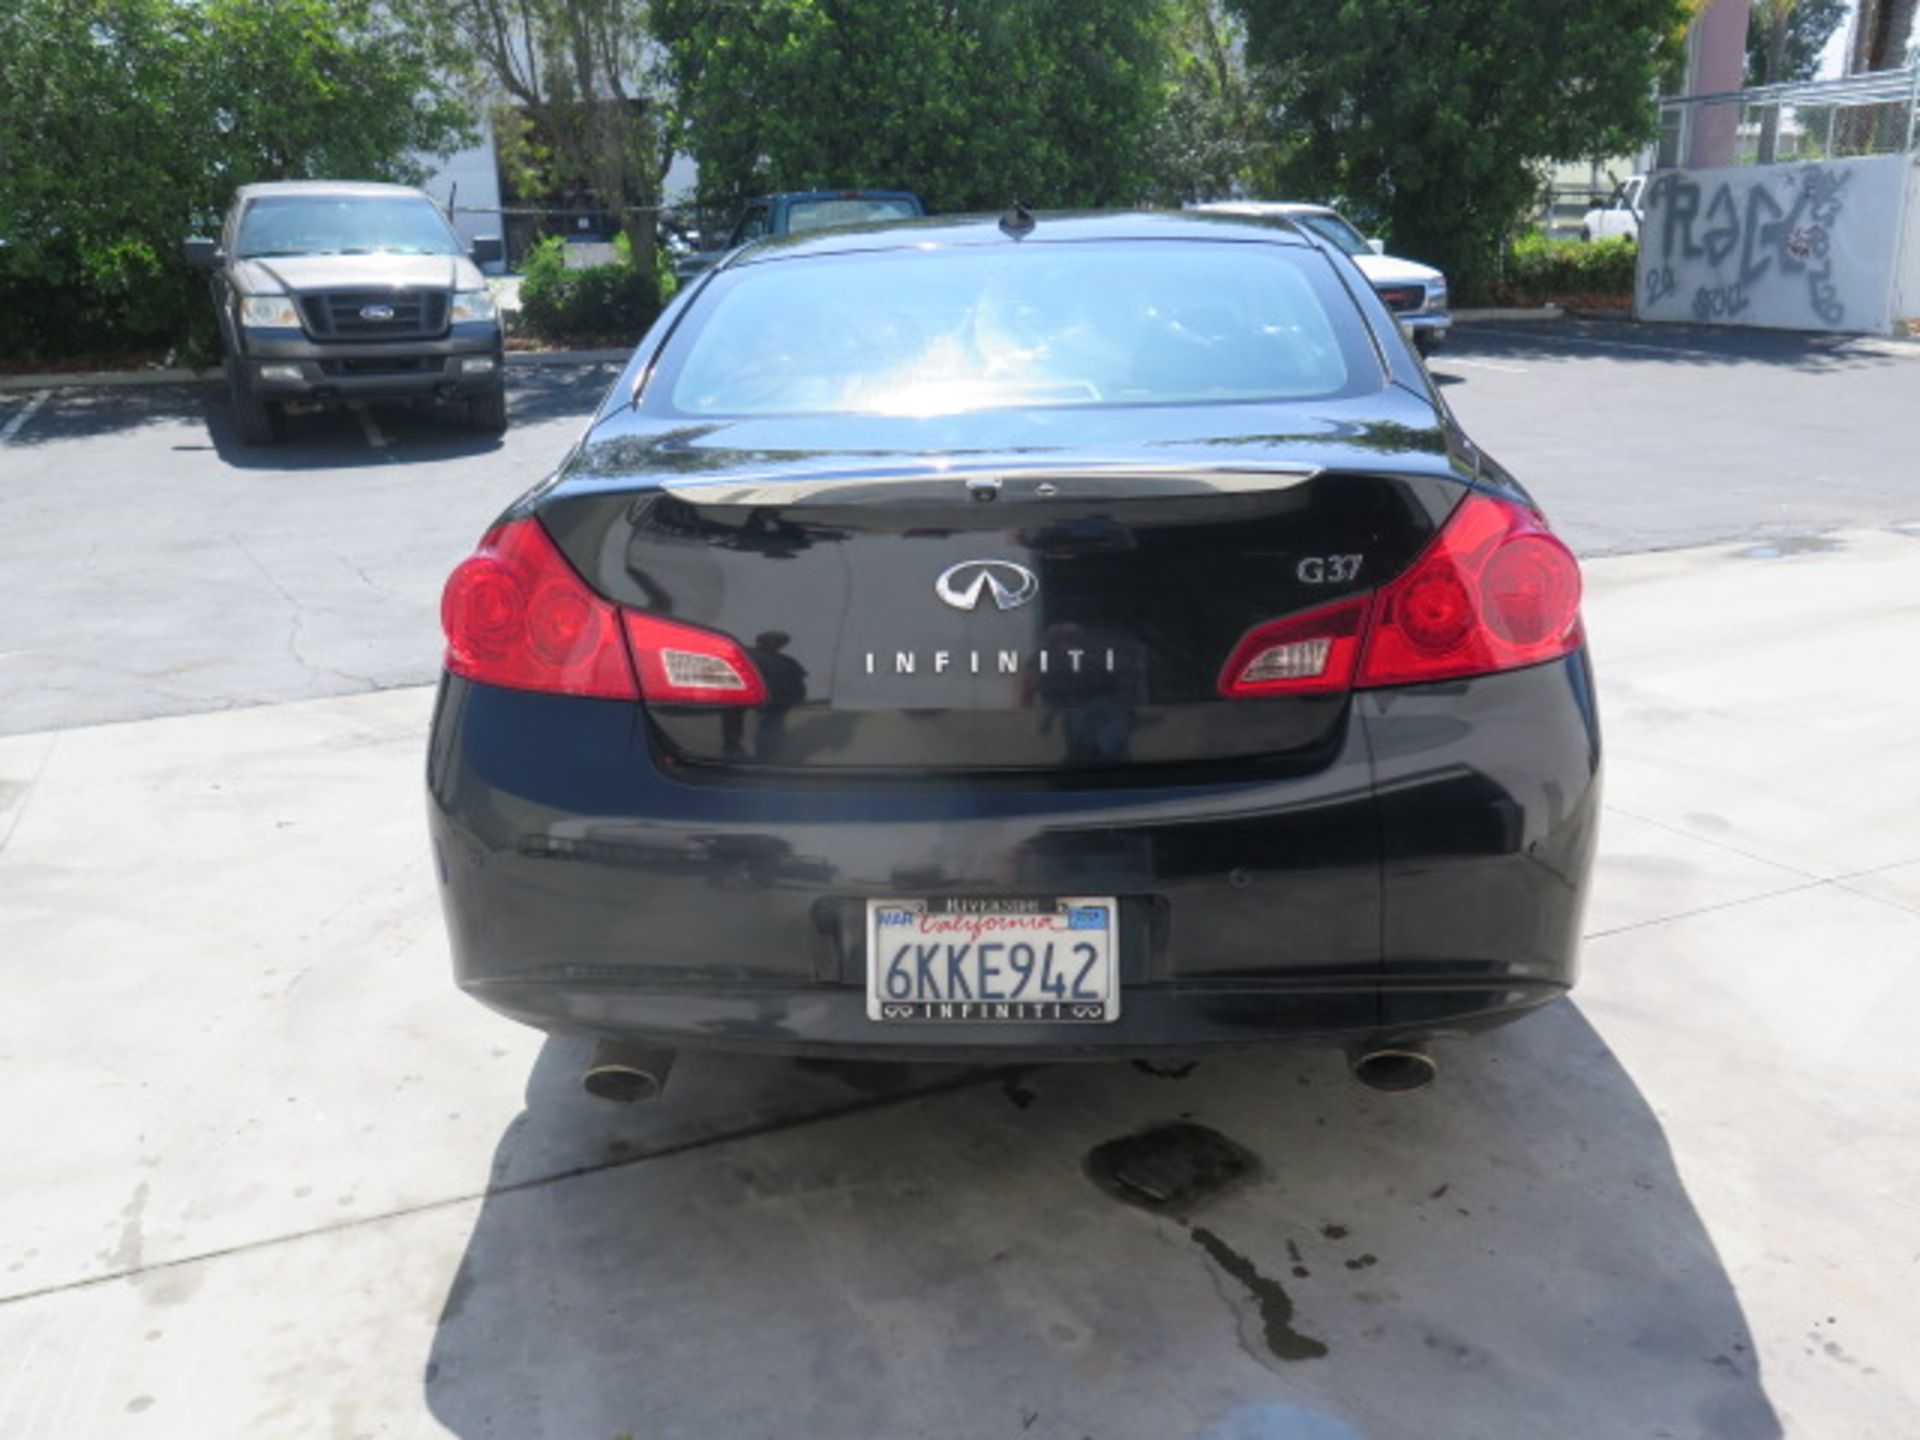 2010 Infinity G37 Lisc# 6KKE924 w/ Rebuilt Gas Engine, Automatic Trans, AC, 133K Miles, SOLD AS IS - Image 5 of 27